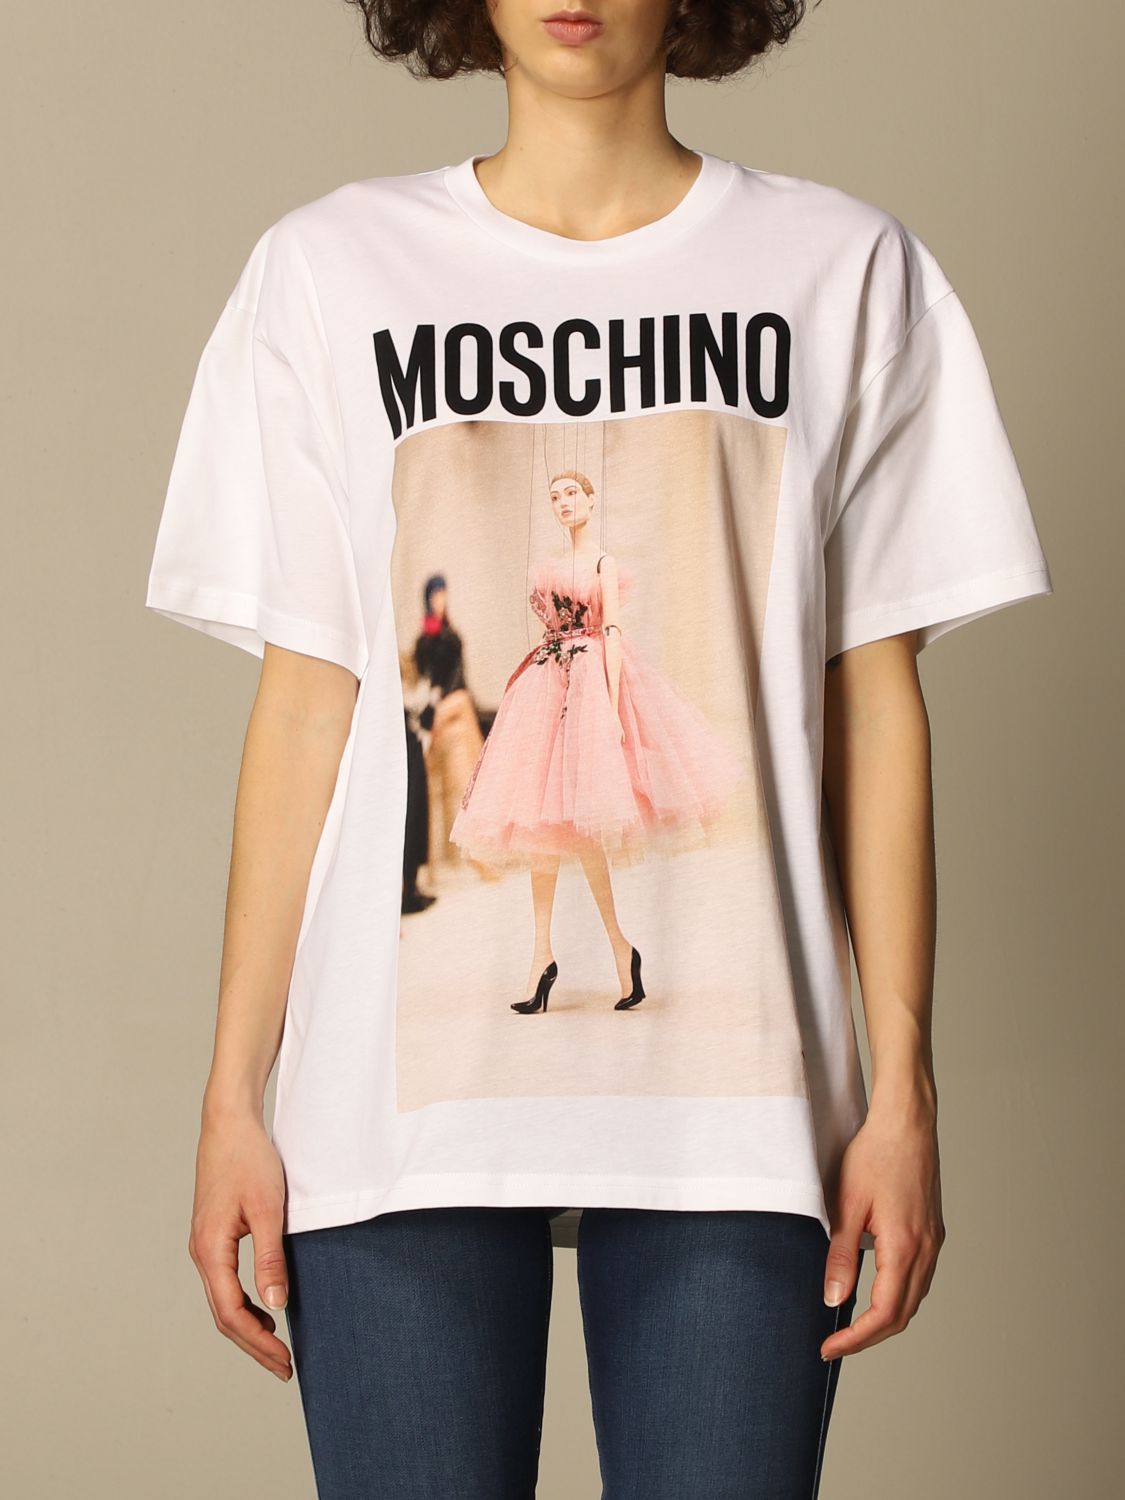 MOSCHINO COUTURE: T-shirt with print - White | Moschino Couture t-shirt ...